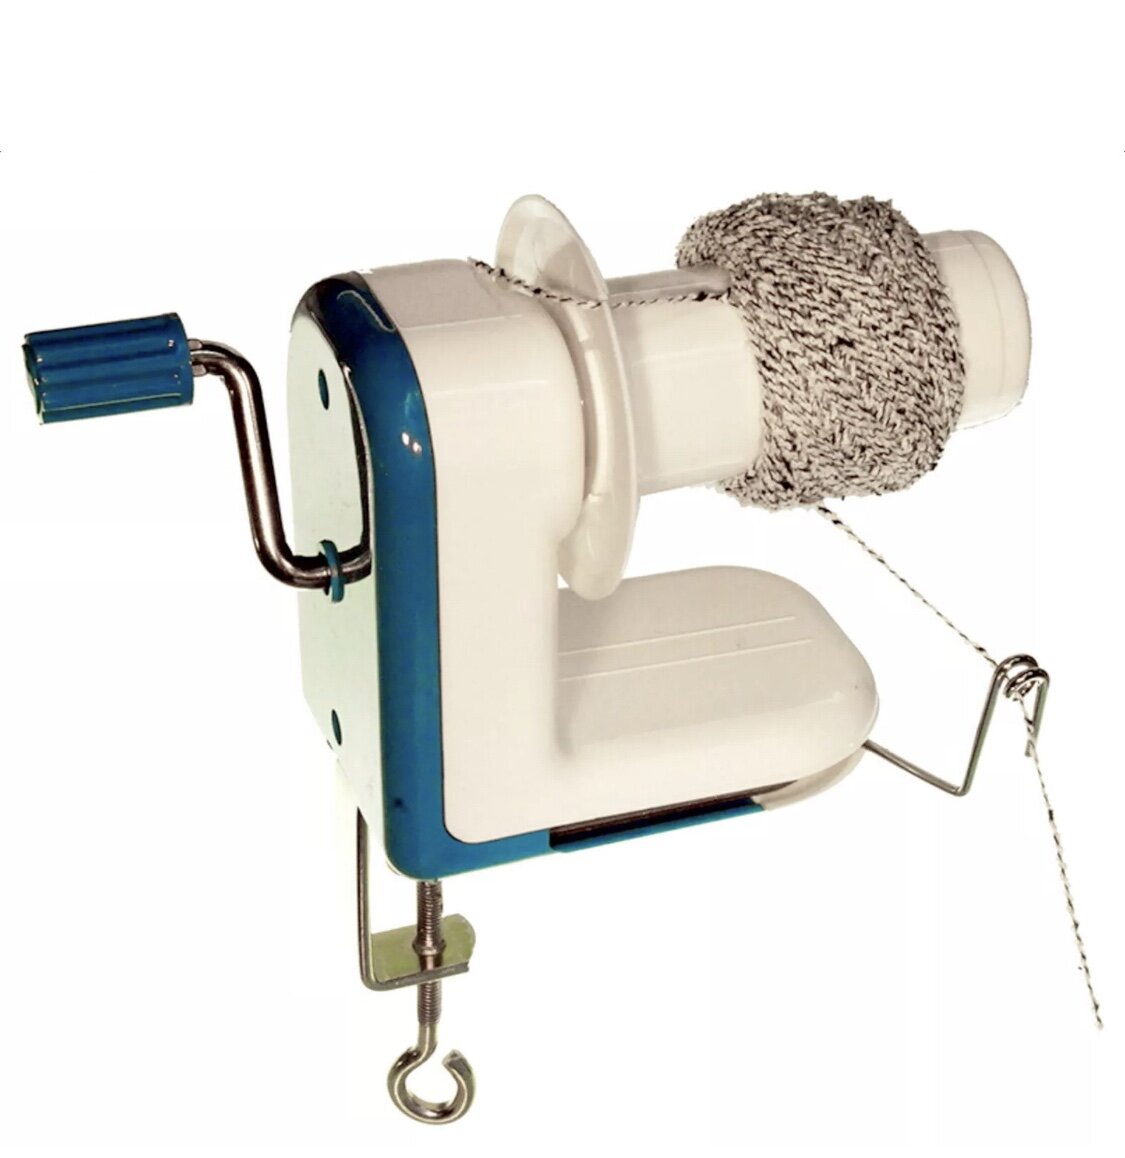 Yarn winder - All industrial manufacturers